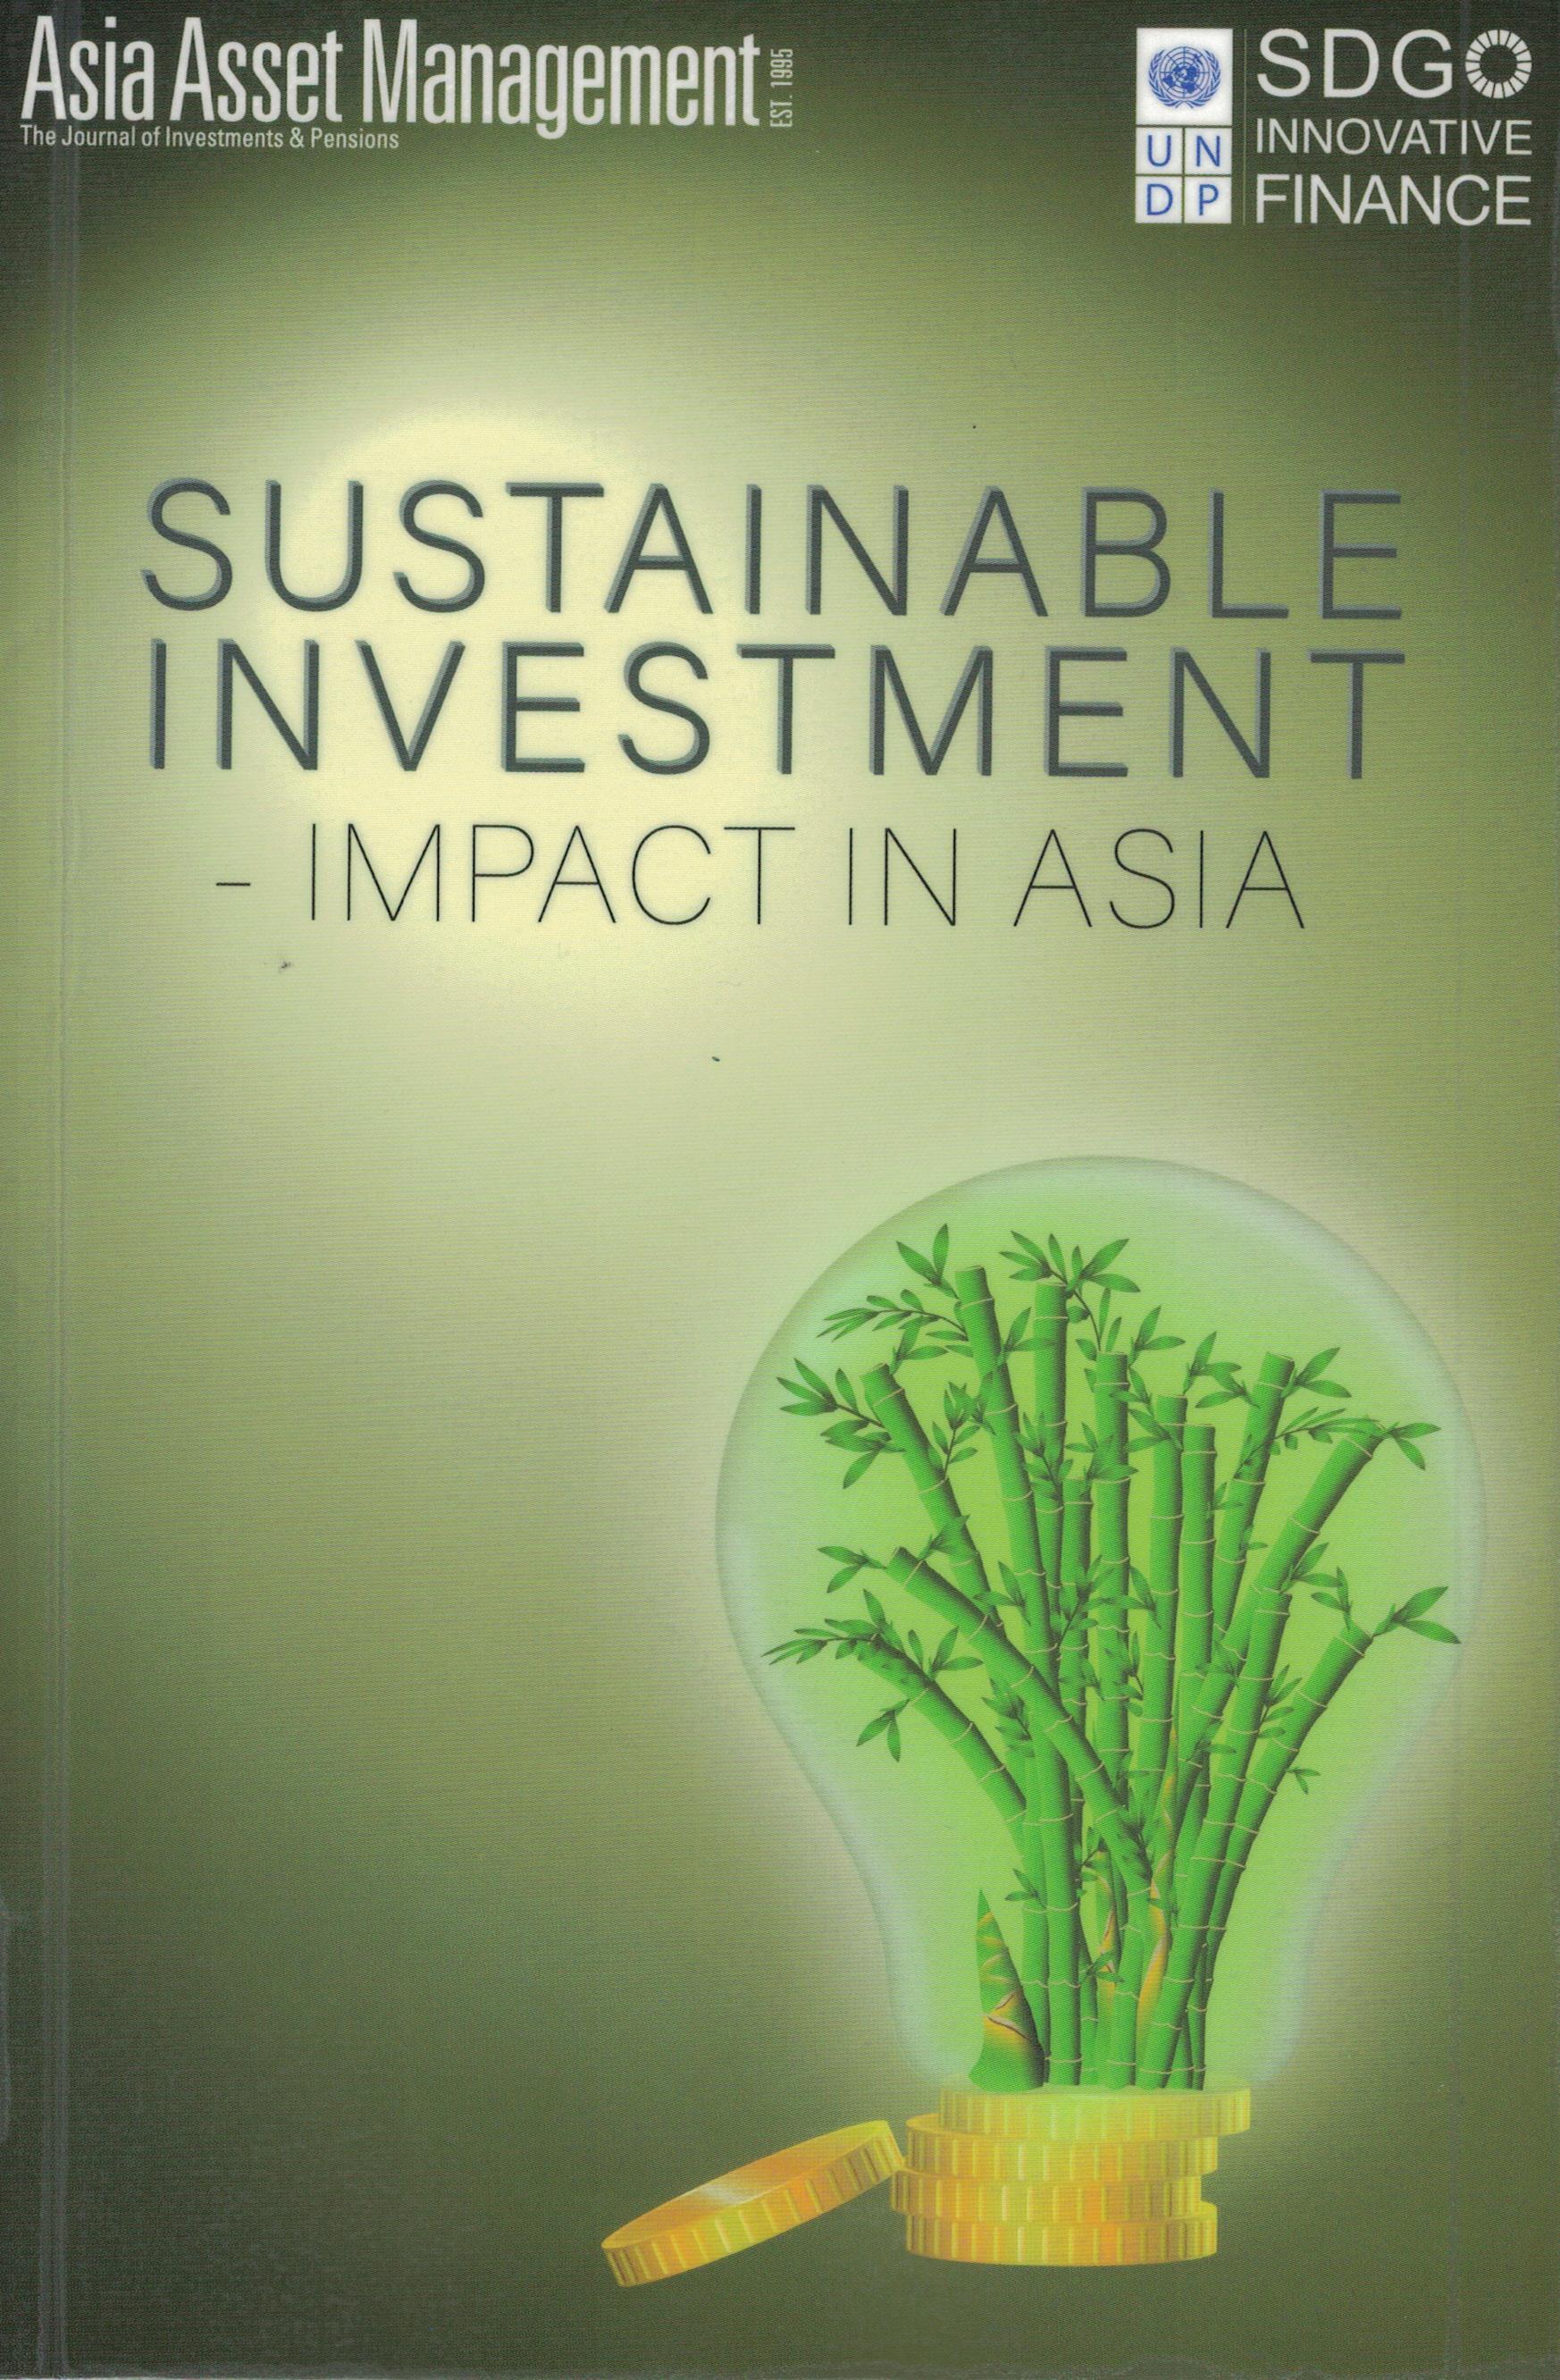 20200303BB_book_cover_Sustainable_Investment_Anthony_Rowley.jpg.jpeg